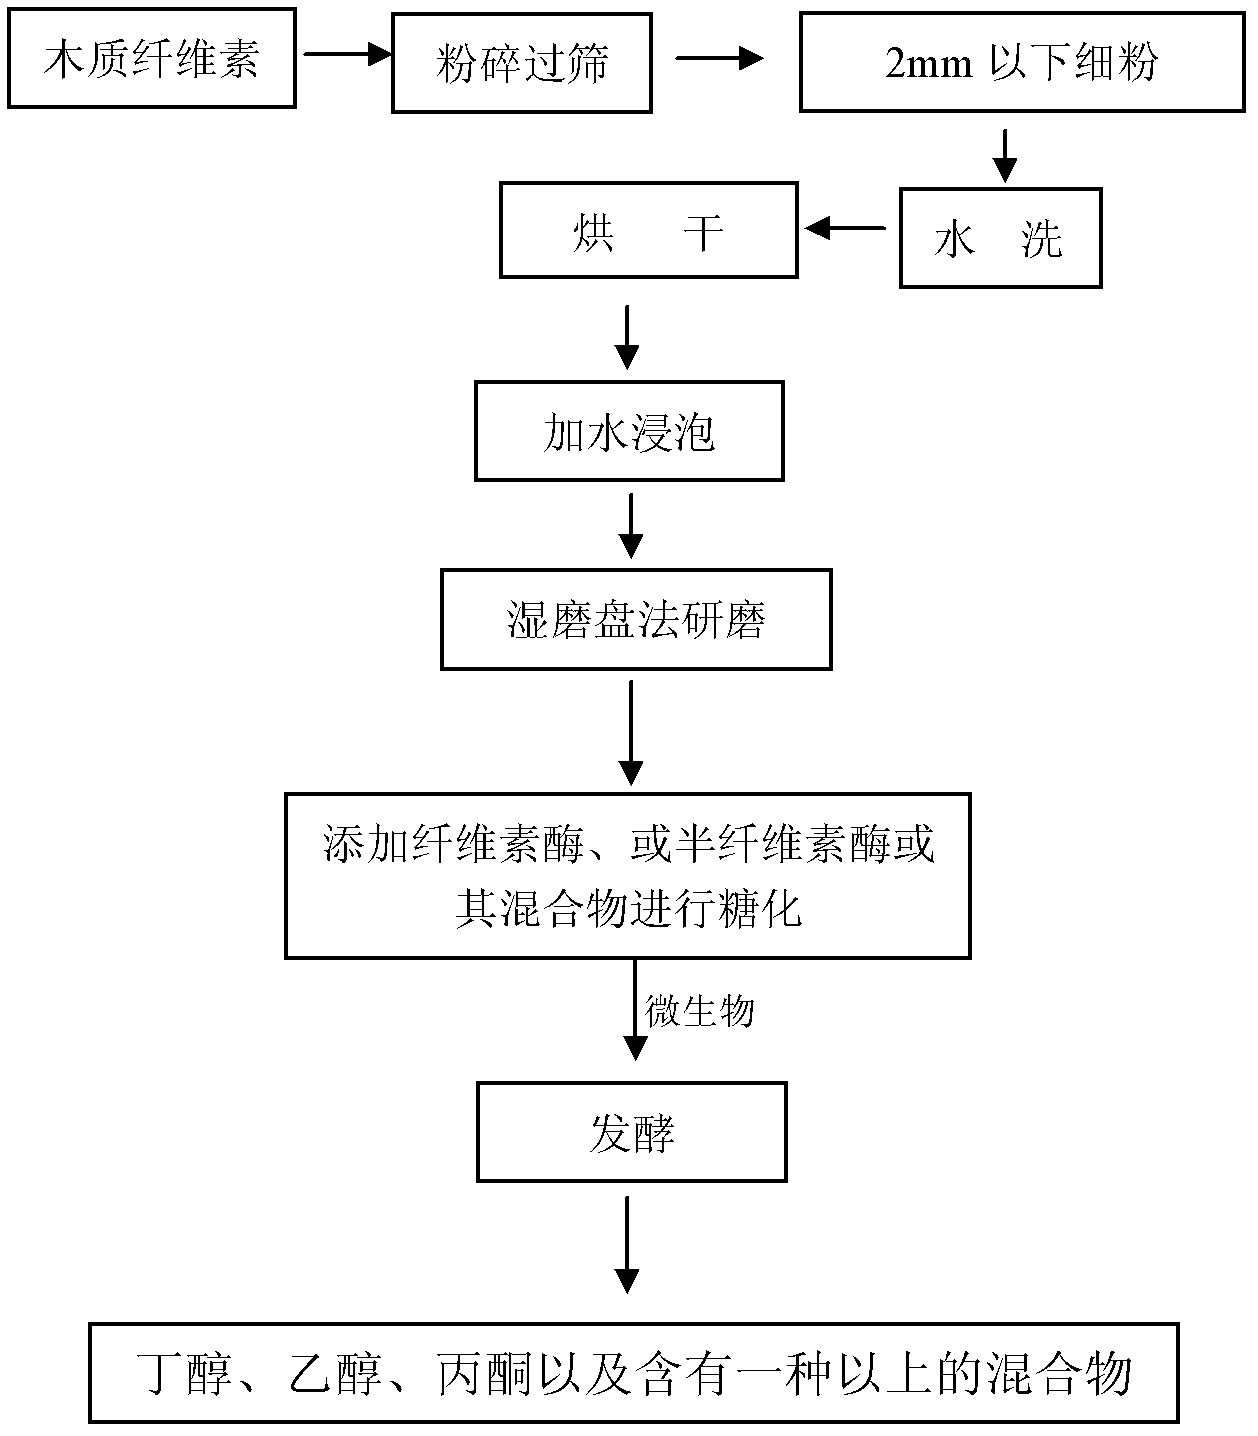 Method for producing ethanol or acetone and butanol by taking lignocellulose as raw material